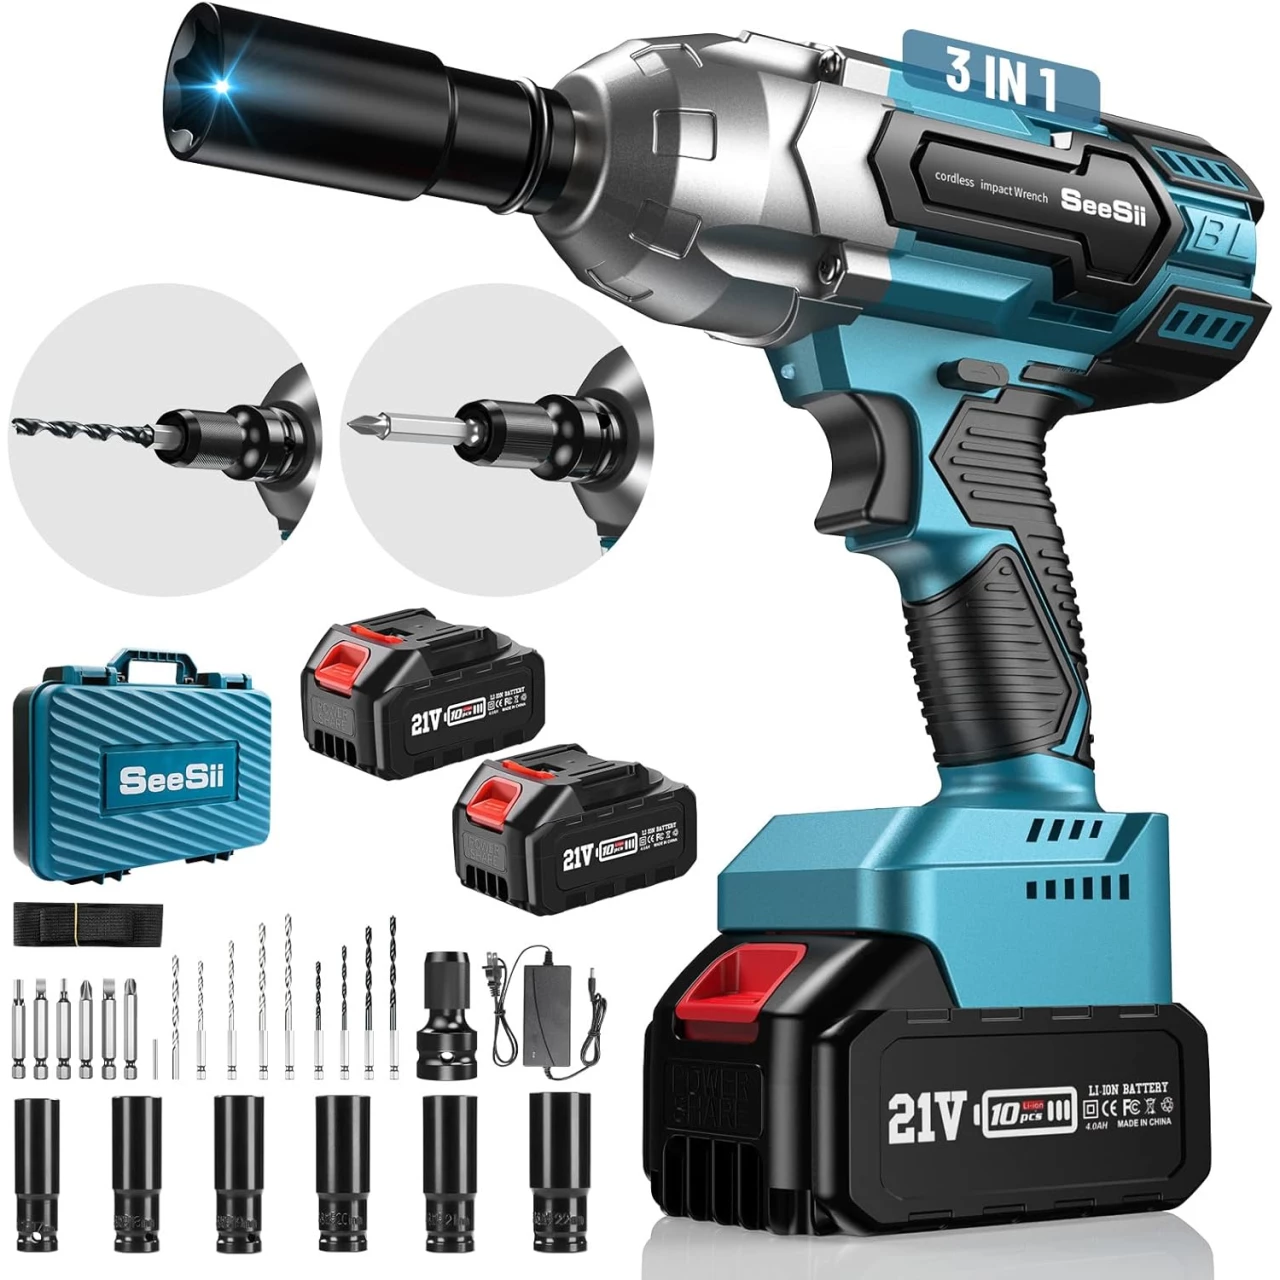 SeeSii Brushless Power Impact Wrench, Cordless, 1/2 inch Max High Torque 479 Ft-lbs(650Nm), 3300RPM w/ 2x 4.0 Battery, 6 Sockets,9 Drill,6 Screws for Car Home, WH700